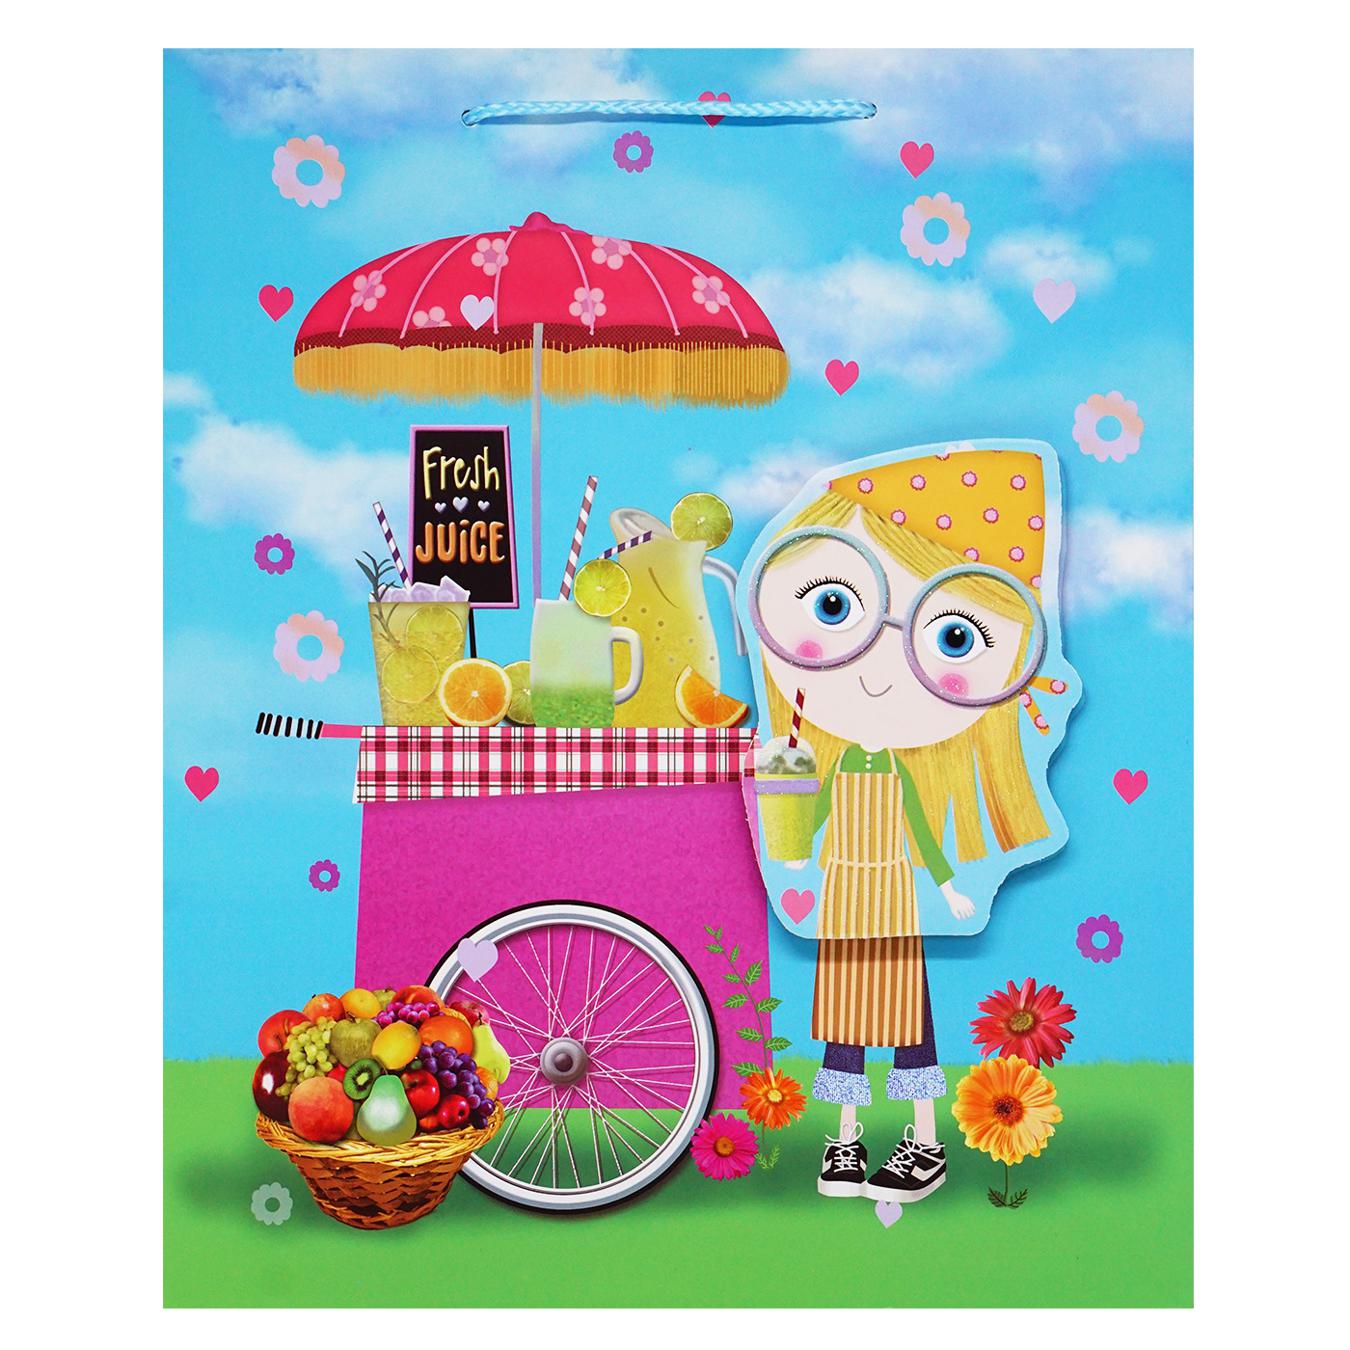 Happycom package for children 26x32 cm 3